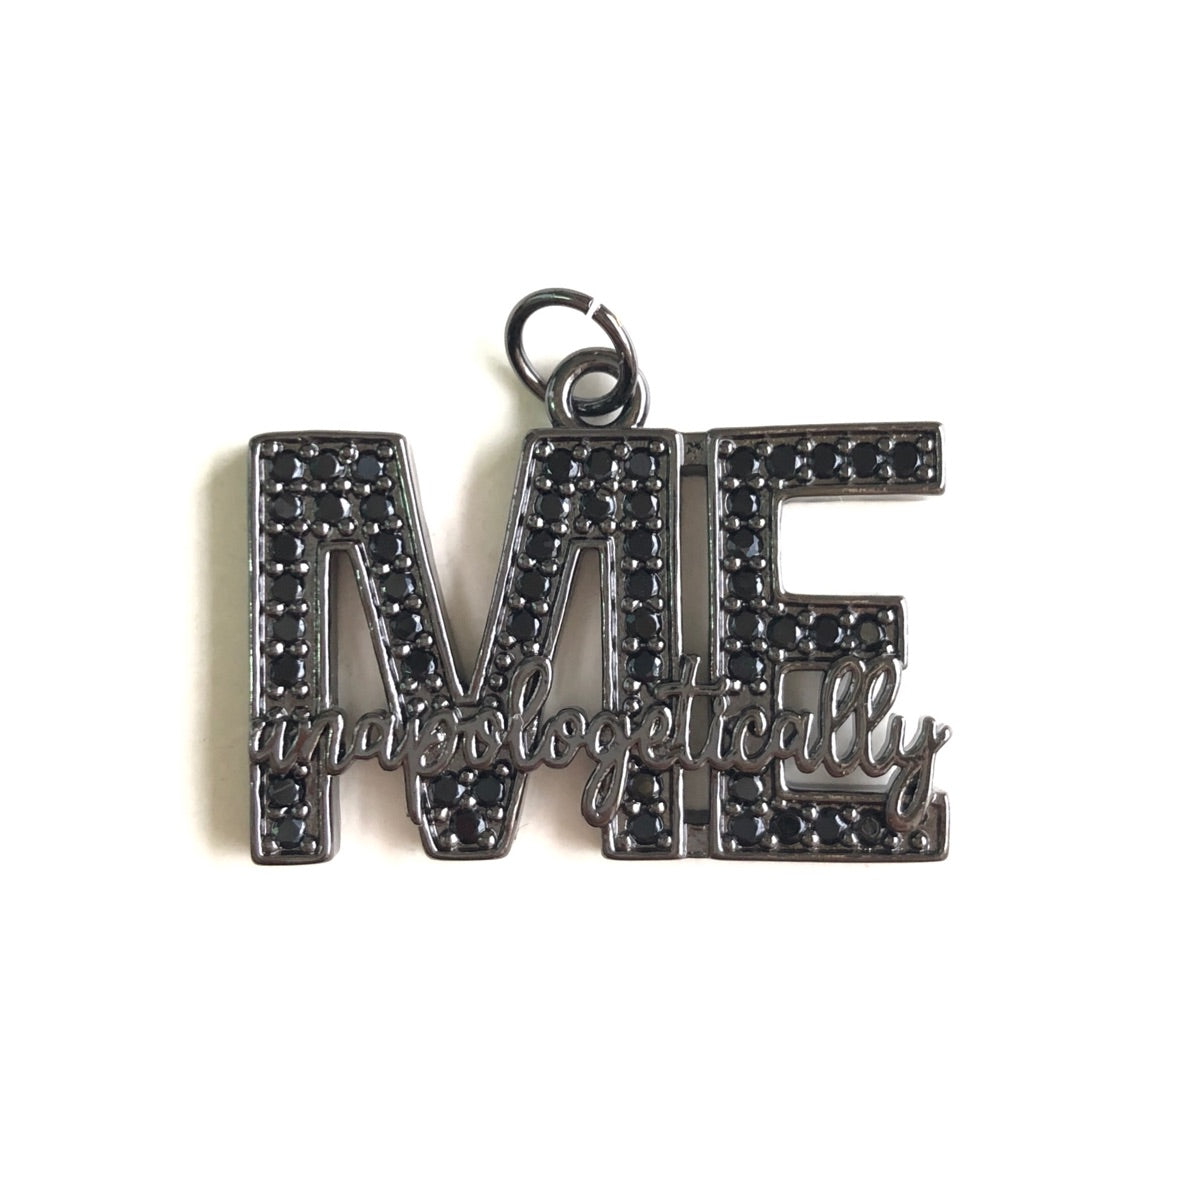 10pcs/lot CZ Paved Unapologetically ME Word Charms Black on Black CZ Paved Charms New Charms Arrivals Words & Quotes Charms Beads Beyond